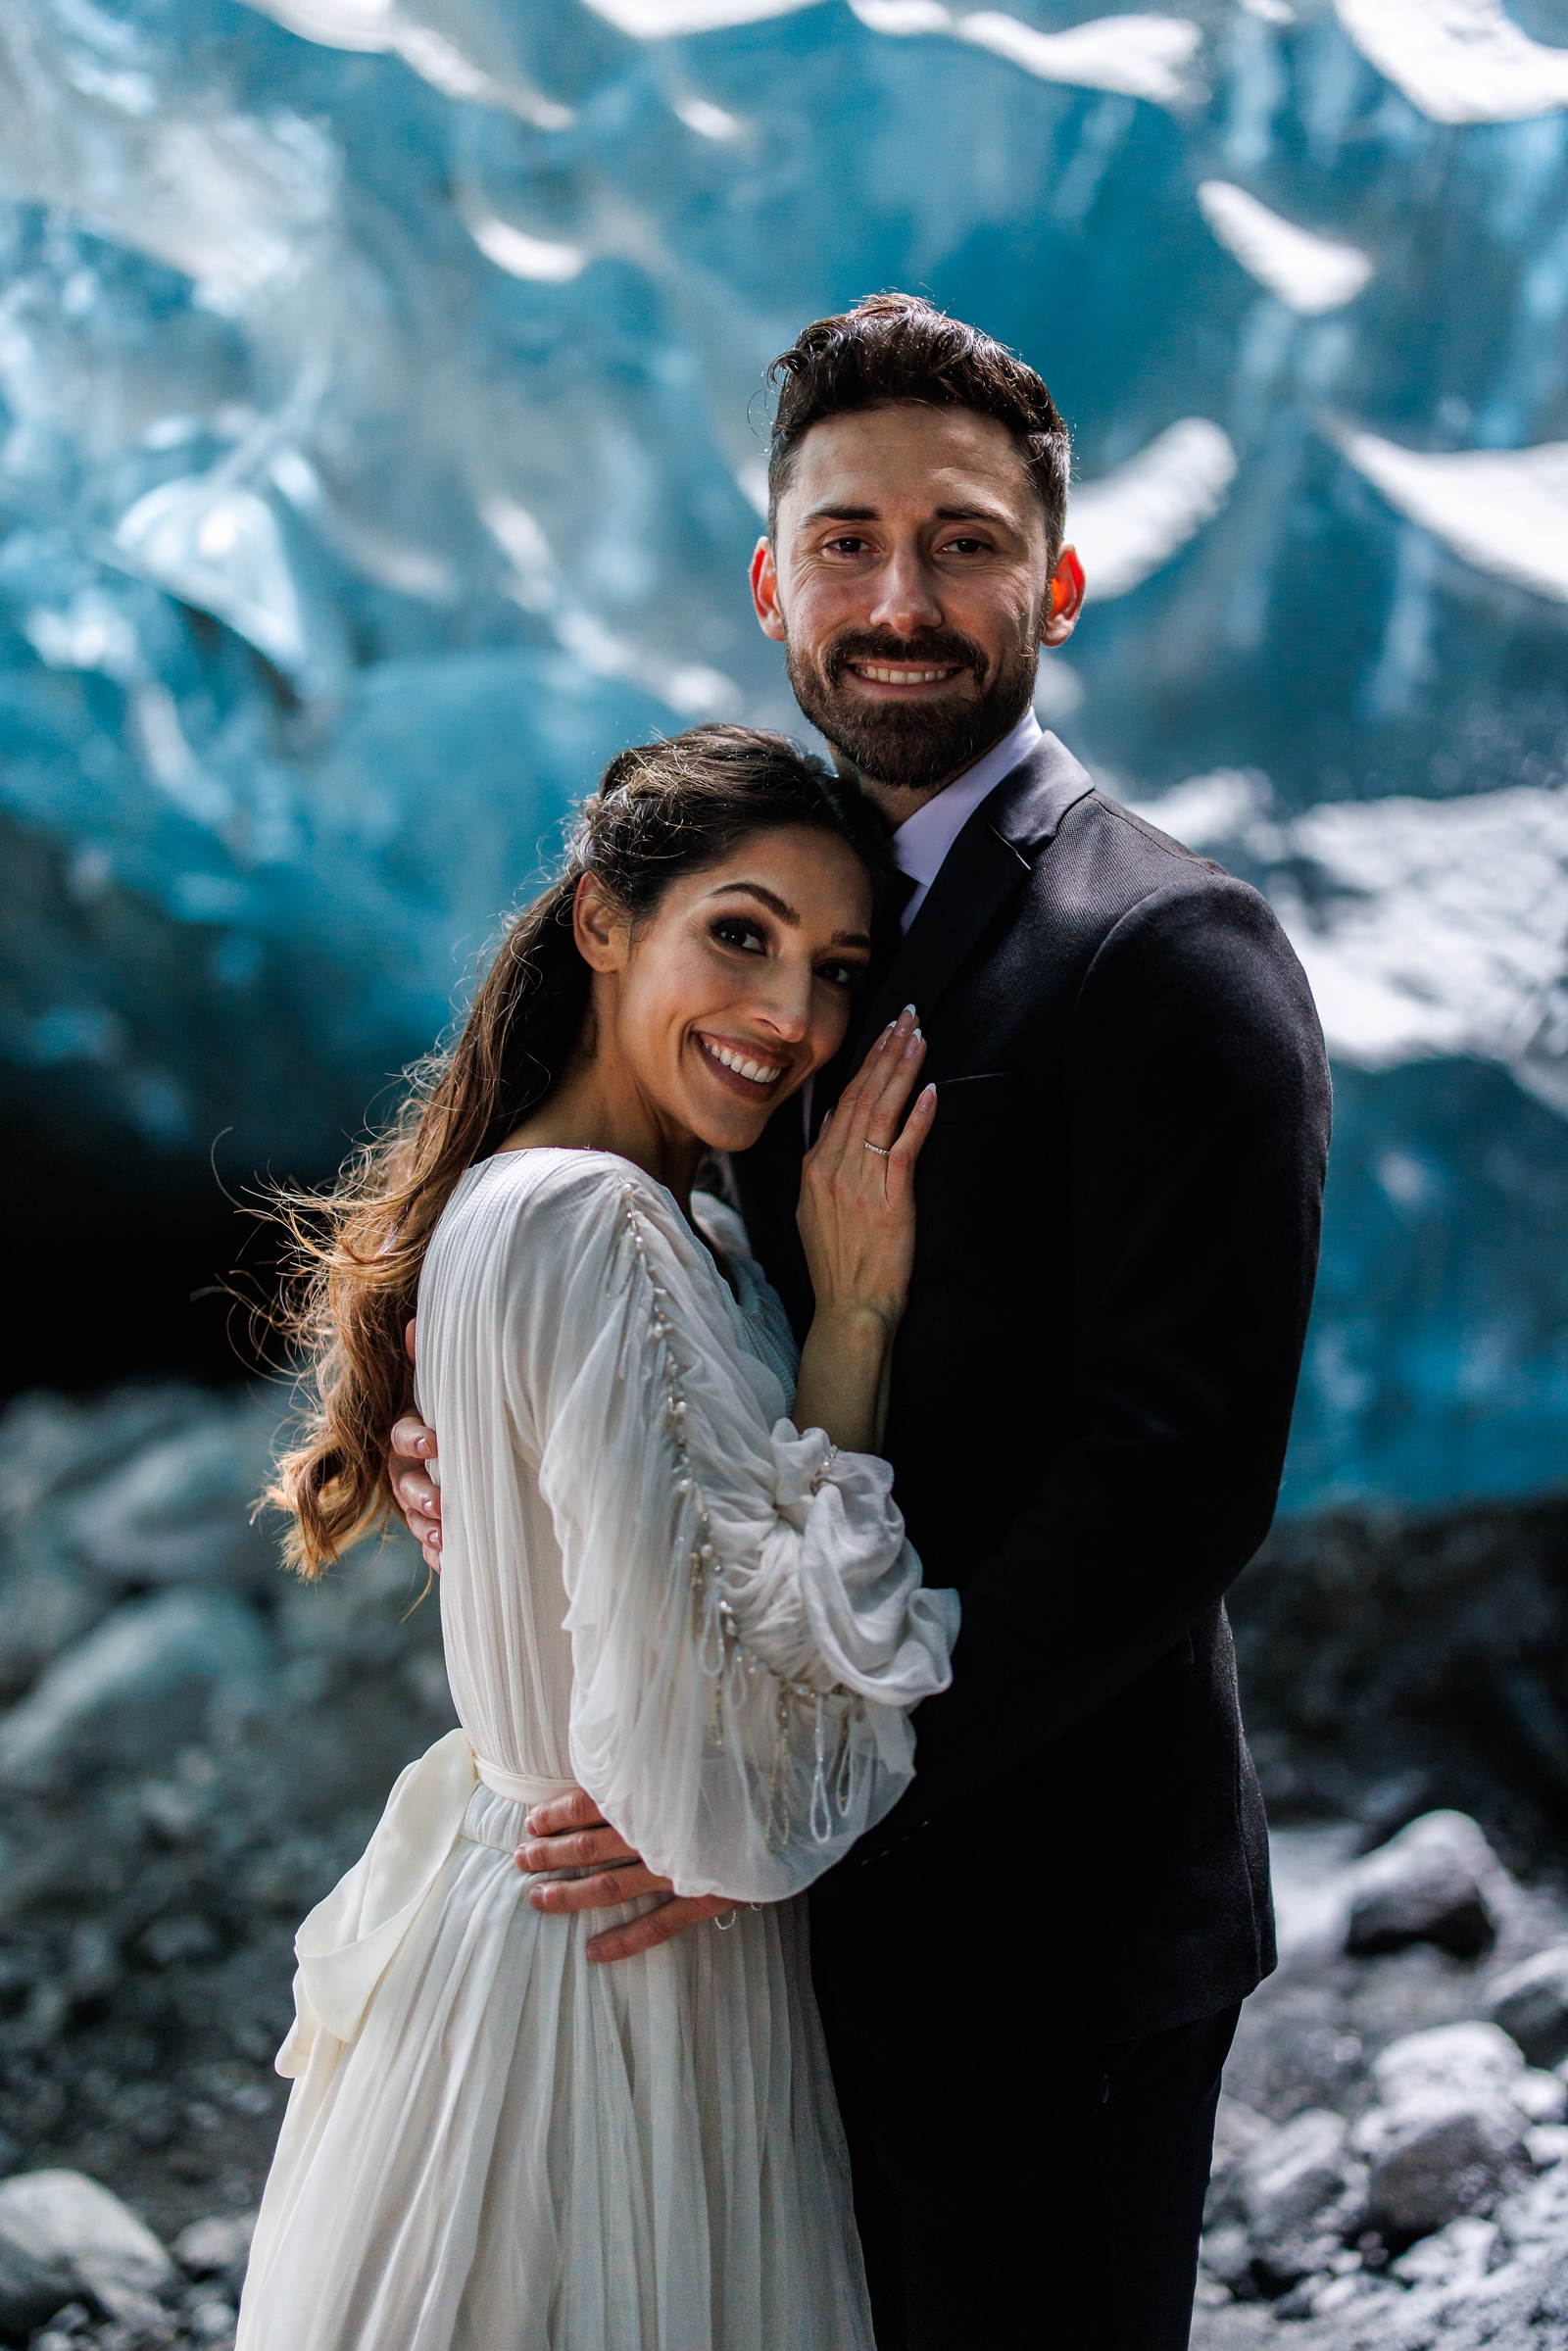 All smiles for this bride and groom on their Iceland elopement day.